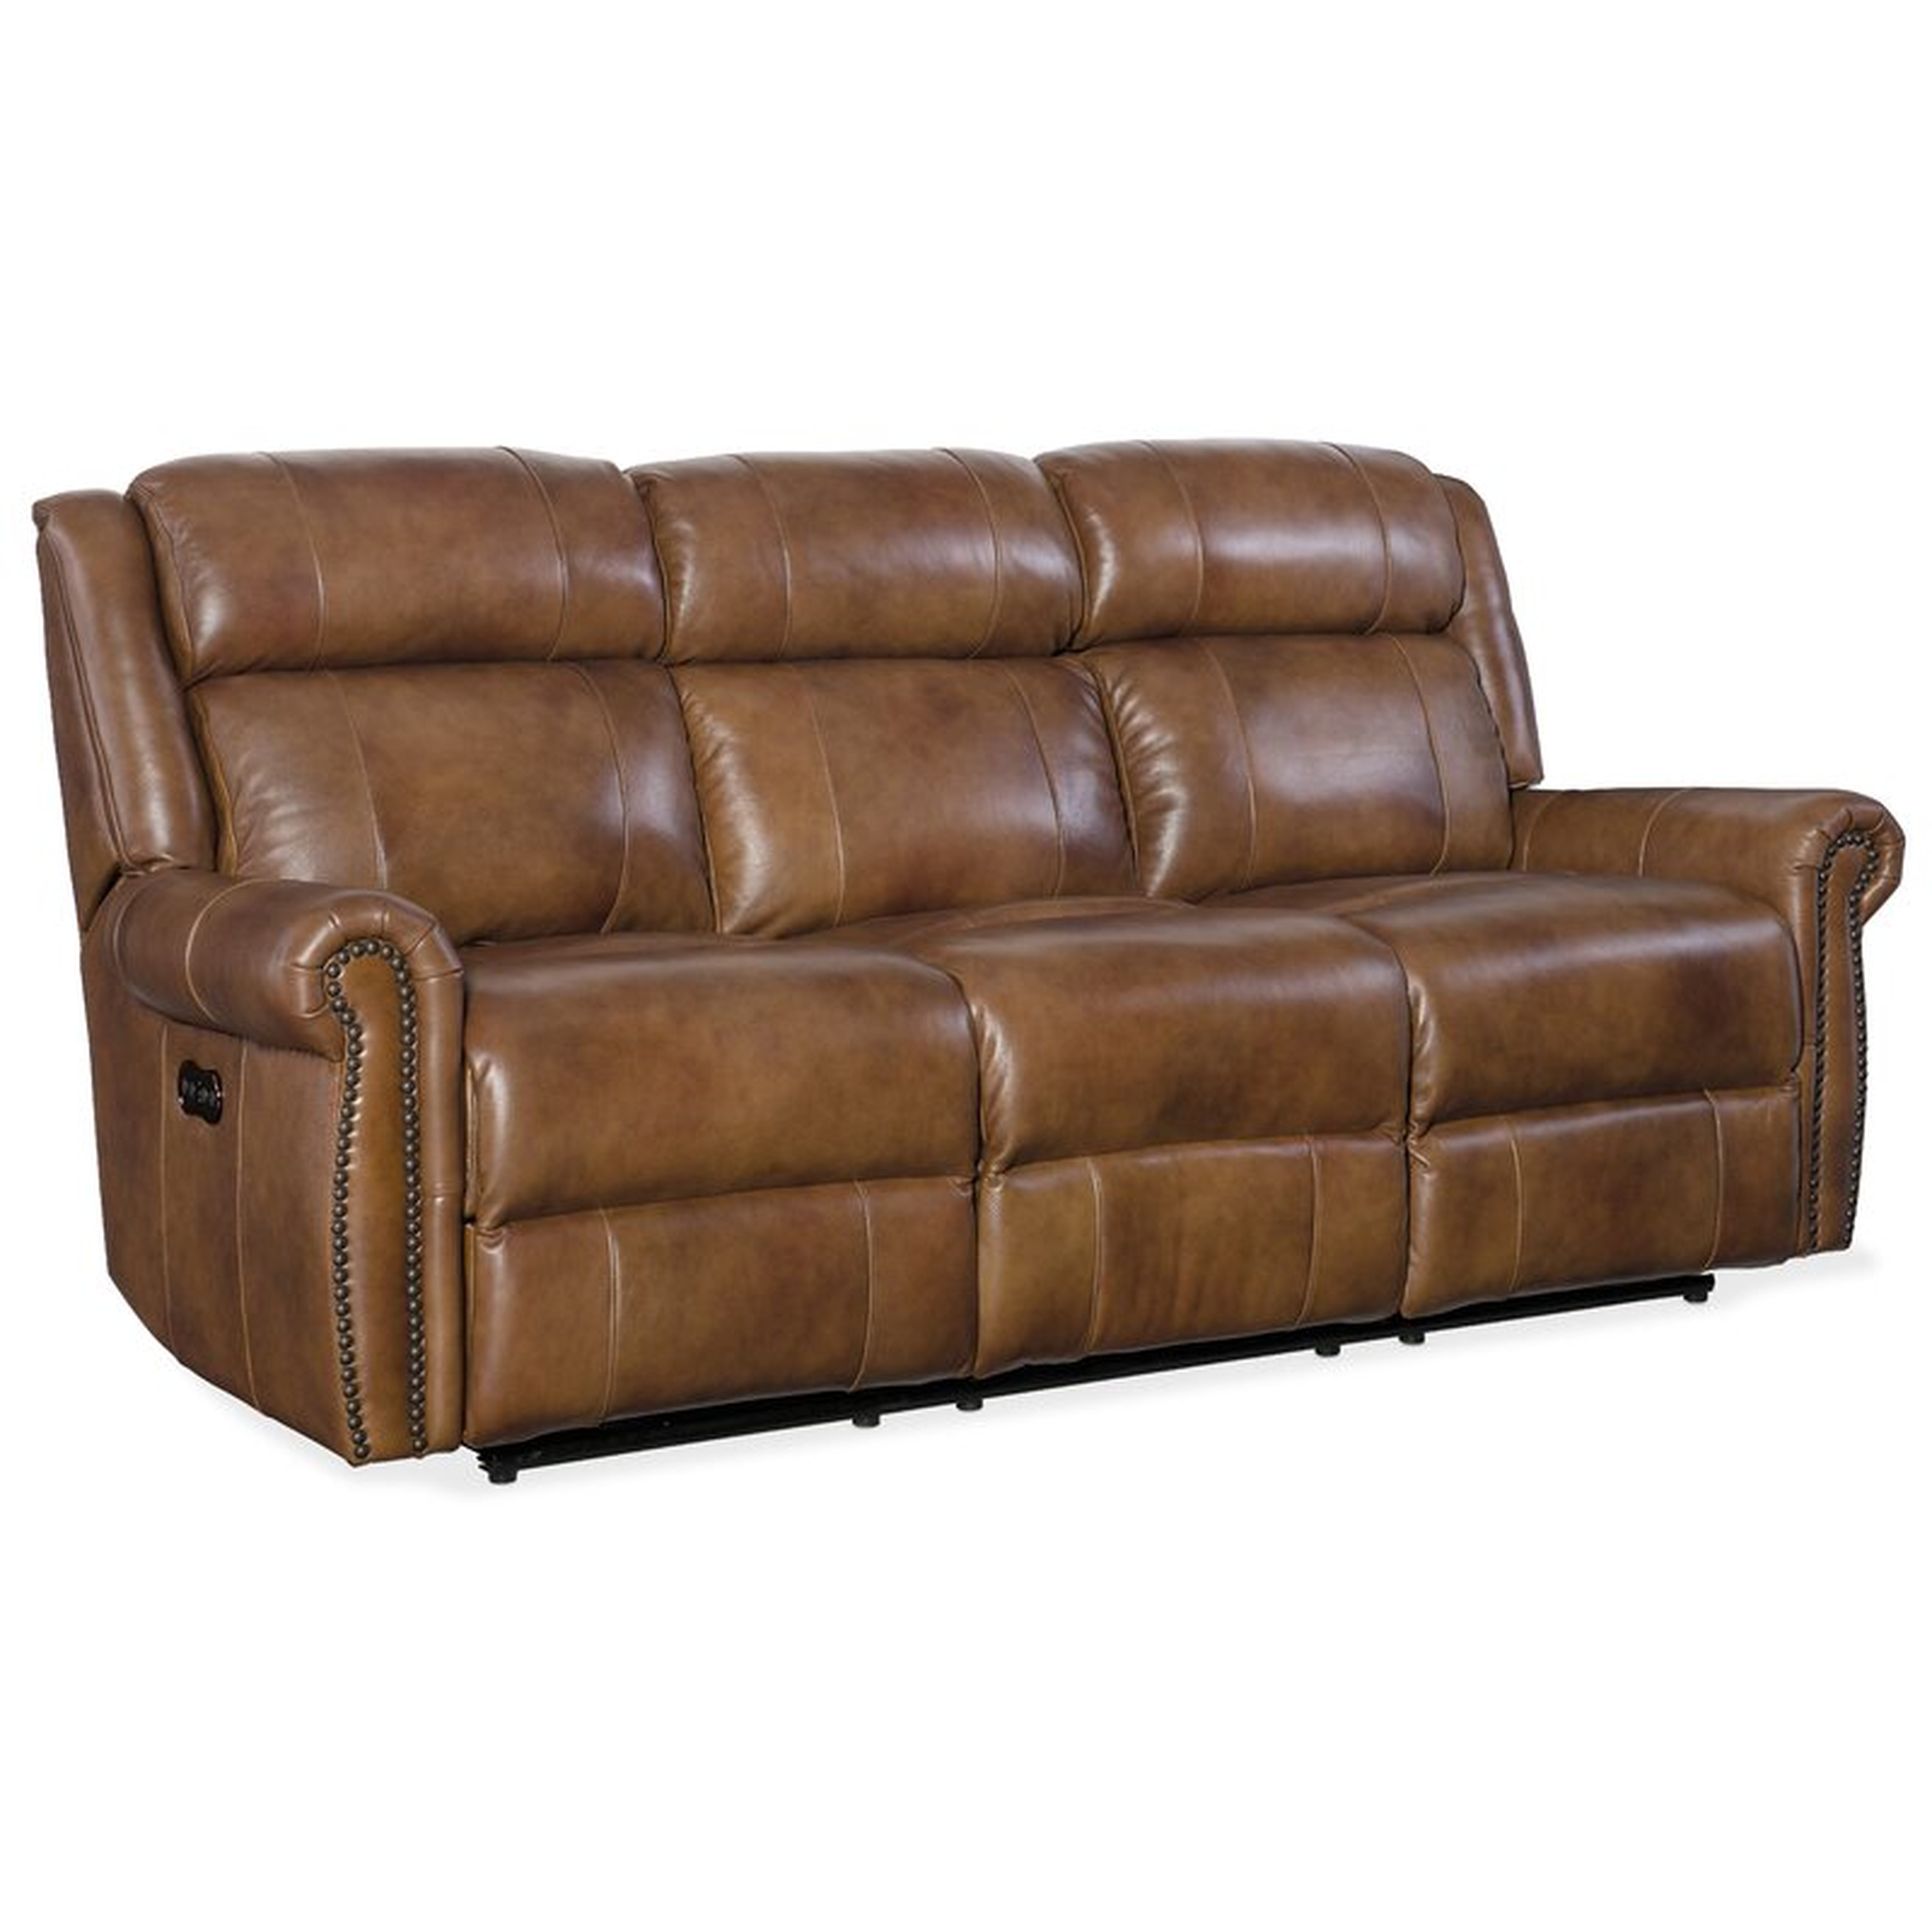 Hooker Furniture Esme 85.5" Wide Genuine Leather Rolled Arm Reclining Sofa - Perigold